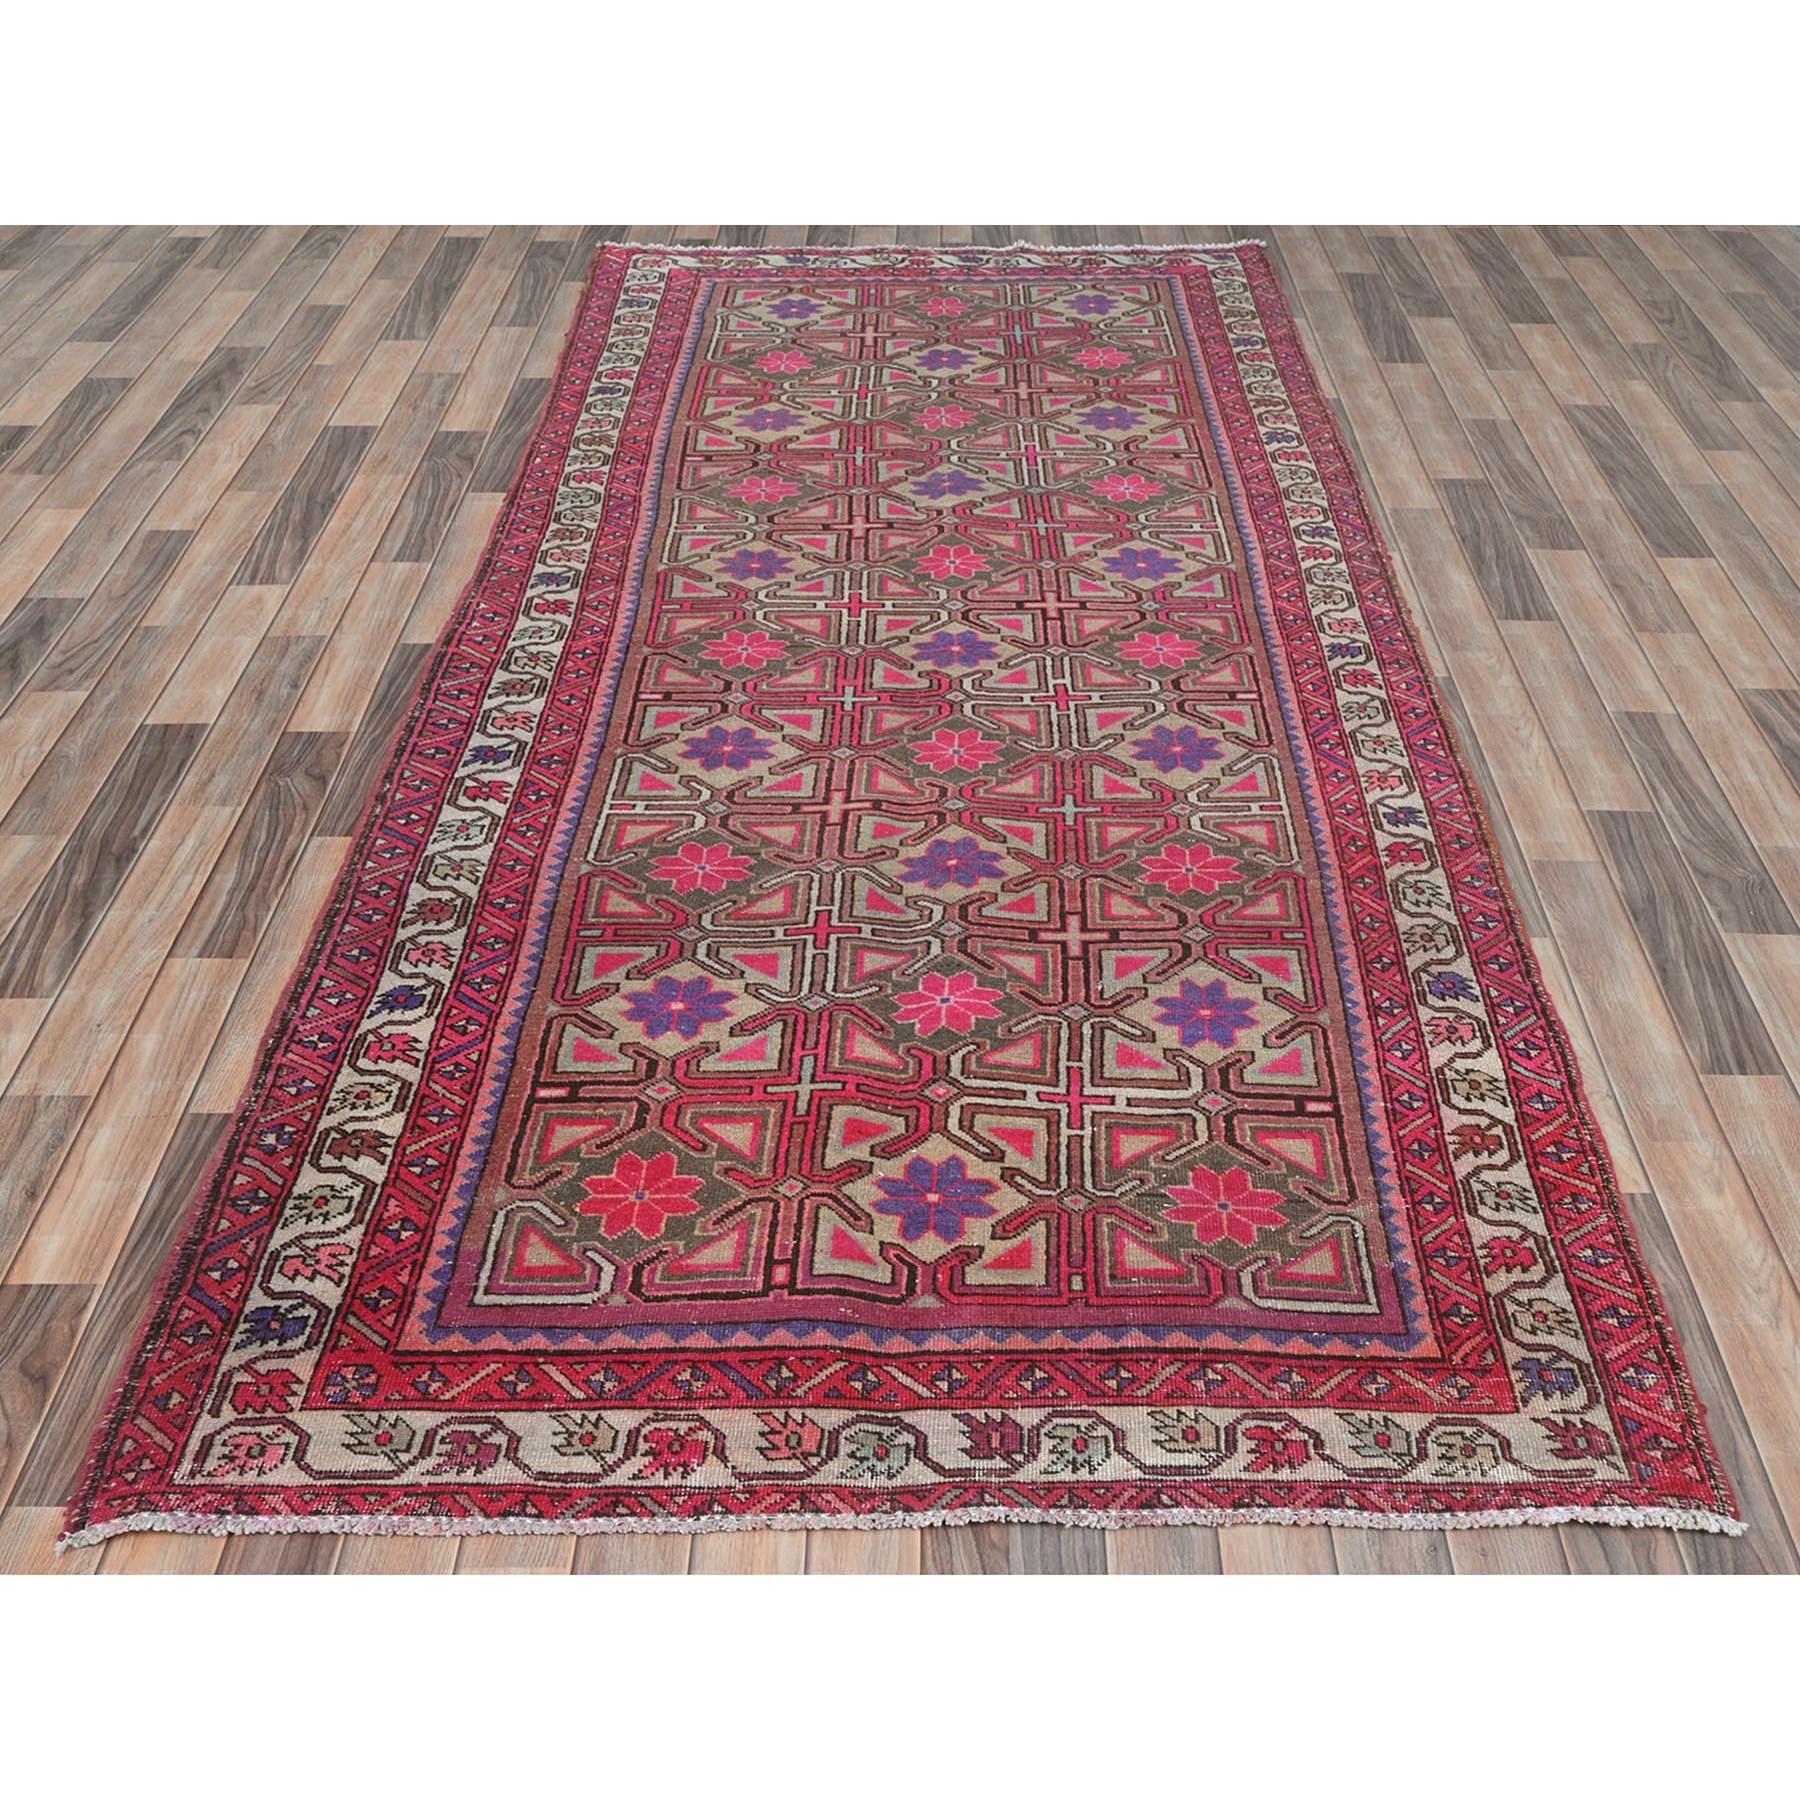 This fabulous Hand-Knotted carpet has been created and designed for extra strength and durability. This rug has been handcrafted for weeks in the traditional method that is used to make
Exact rug size in feet and inches : 4'8